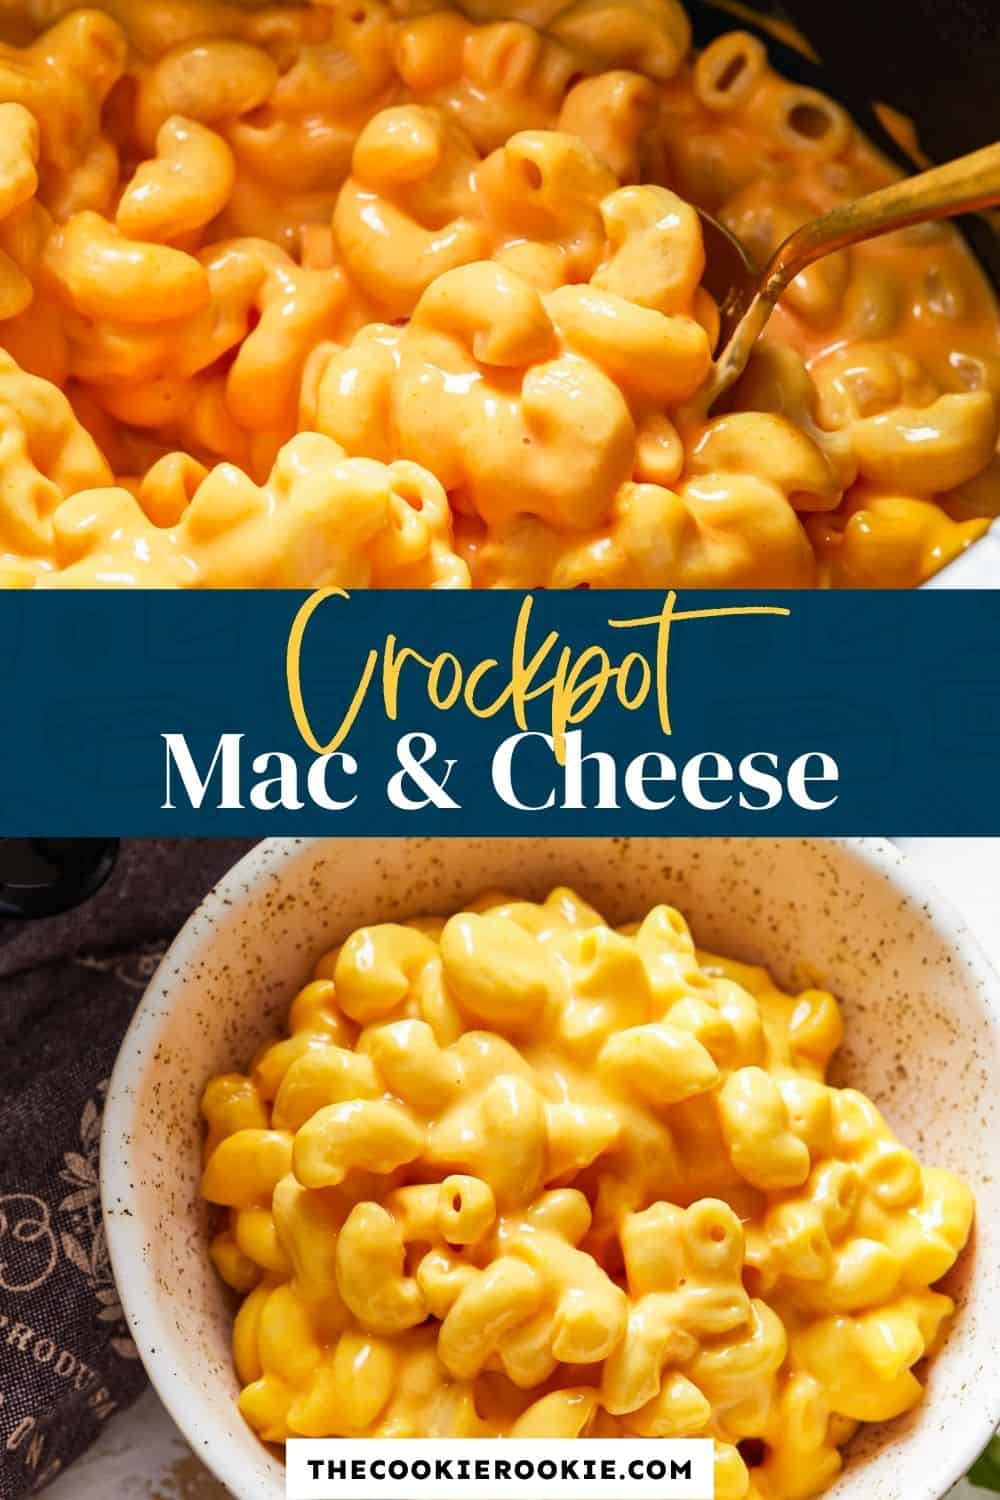 Crockpot Mac and Cheese (Creamy & Easy) - The Cookie Rookie®